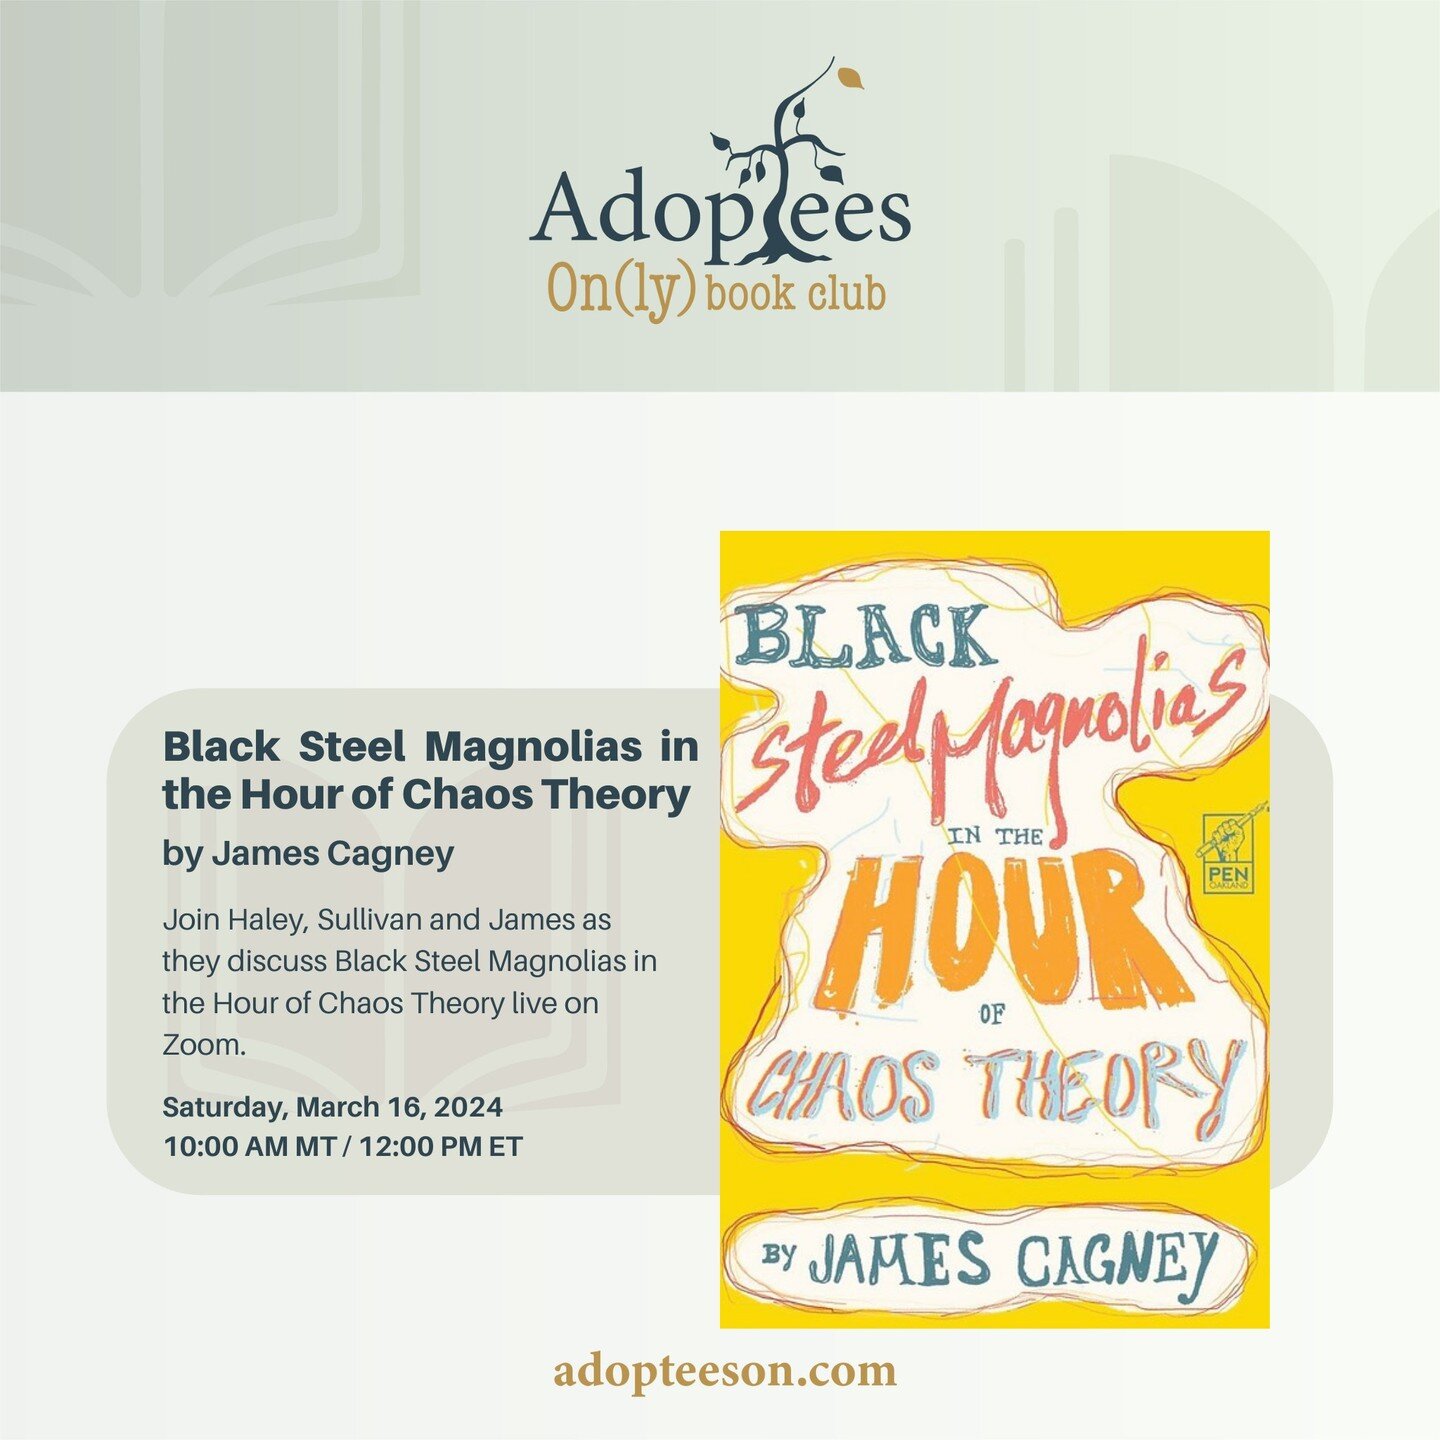 Tomorrow! Join us for our live March Adoptees On(ly) Book Club discussion with Haley Radke, Sullivan Summer, and James Cagney as we discuss Black Steel Magnolias in the Hour of Chaos Theory.

We've got a free trial available on Patreon, we'd love to 